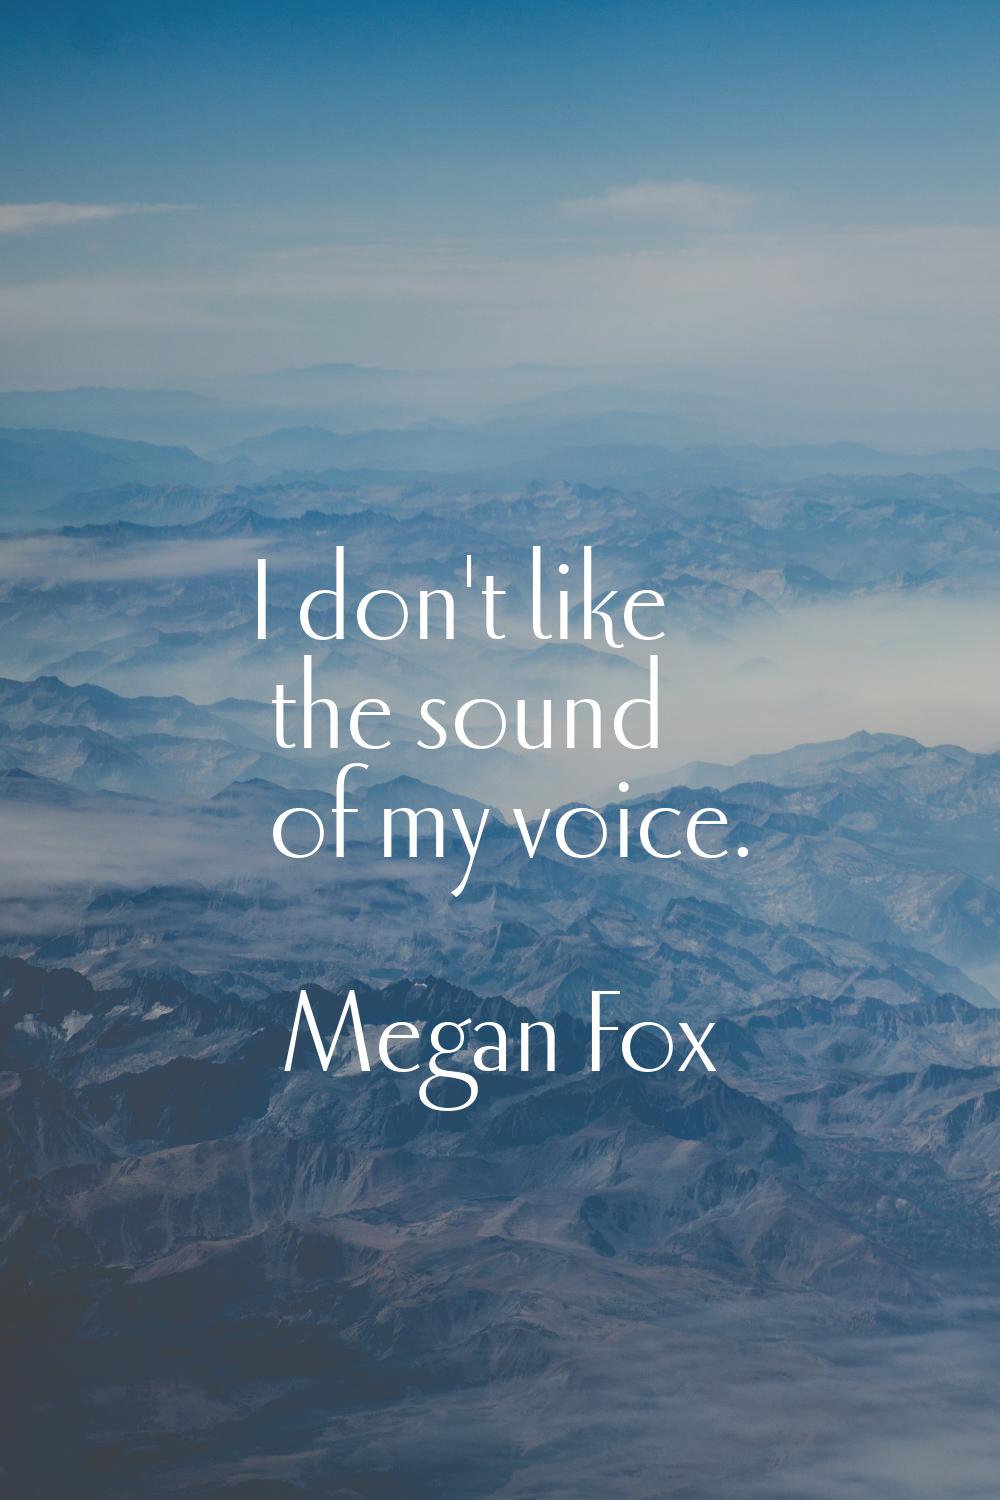 I don't like the sound of my voice.